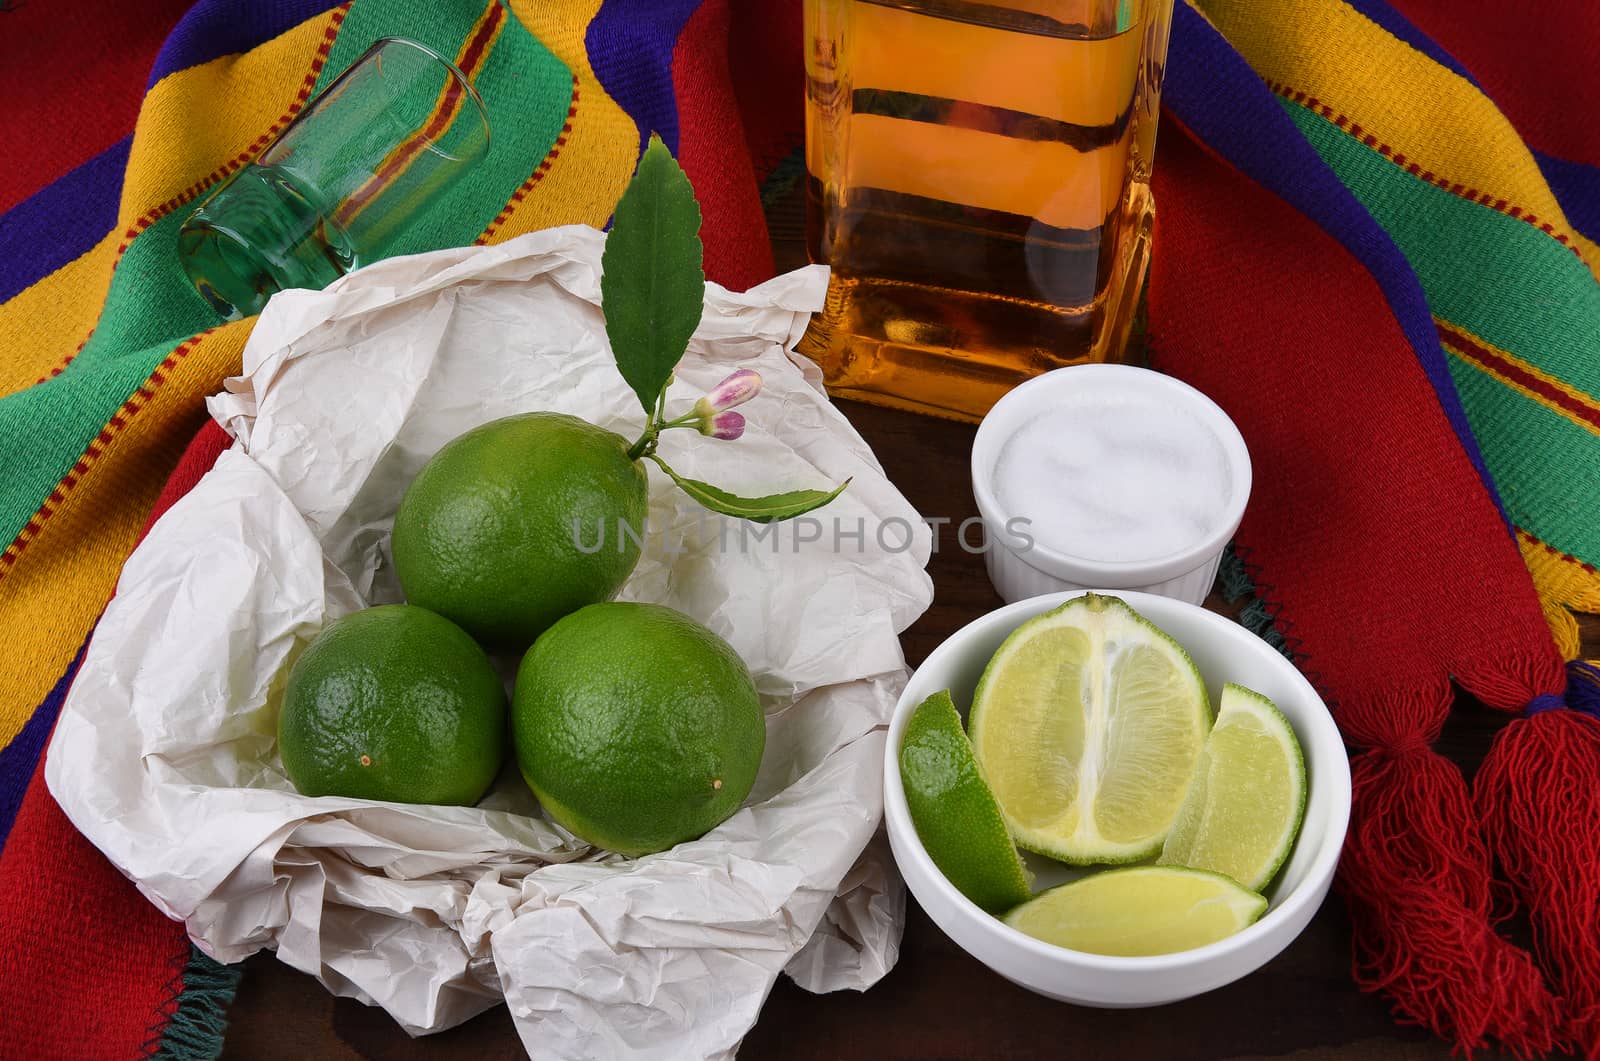 Tequila shot with limes, salt, Mexican blanket. Great for Cinco de Mayo themed projects or Mexican restaurants.